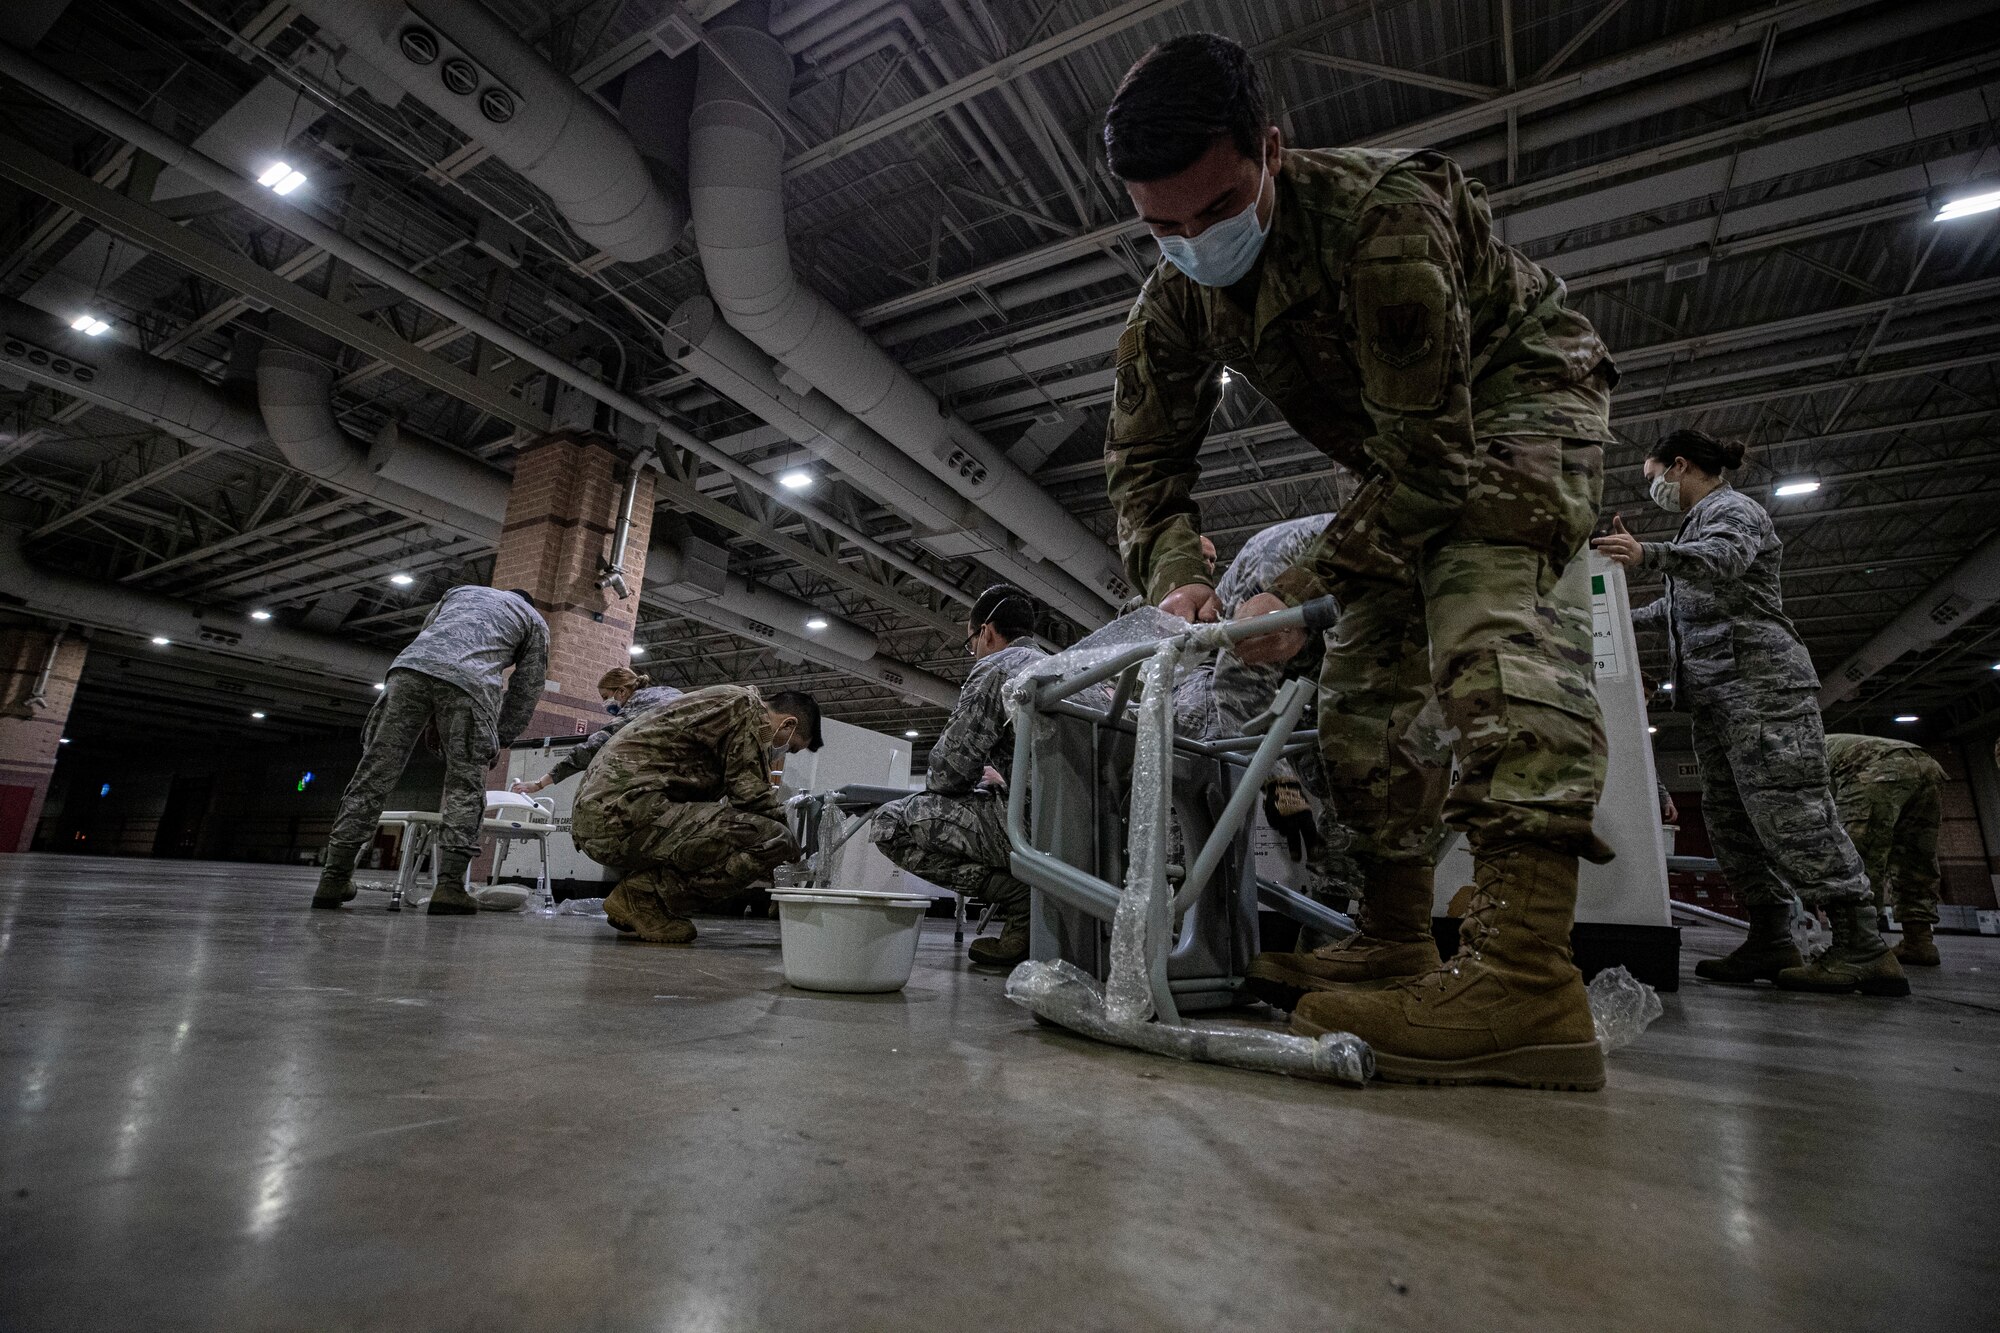 New Jersey Air National Guard Airmen set up equipment during the buildup of a Field Medical Station at the Atlantic City Convention Center in Atlantic City, N.J., April 9, 2020.  Atlantic City is one of three stations that will offer overflow from local hospitals focused on COVID-19 patients. (U.S. Air National Guard photo by Master Sgt. Matt Hecht)